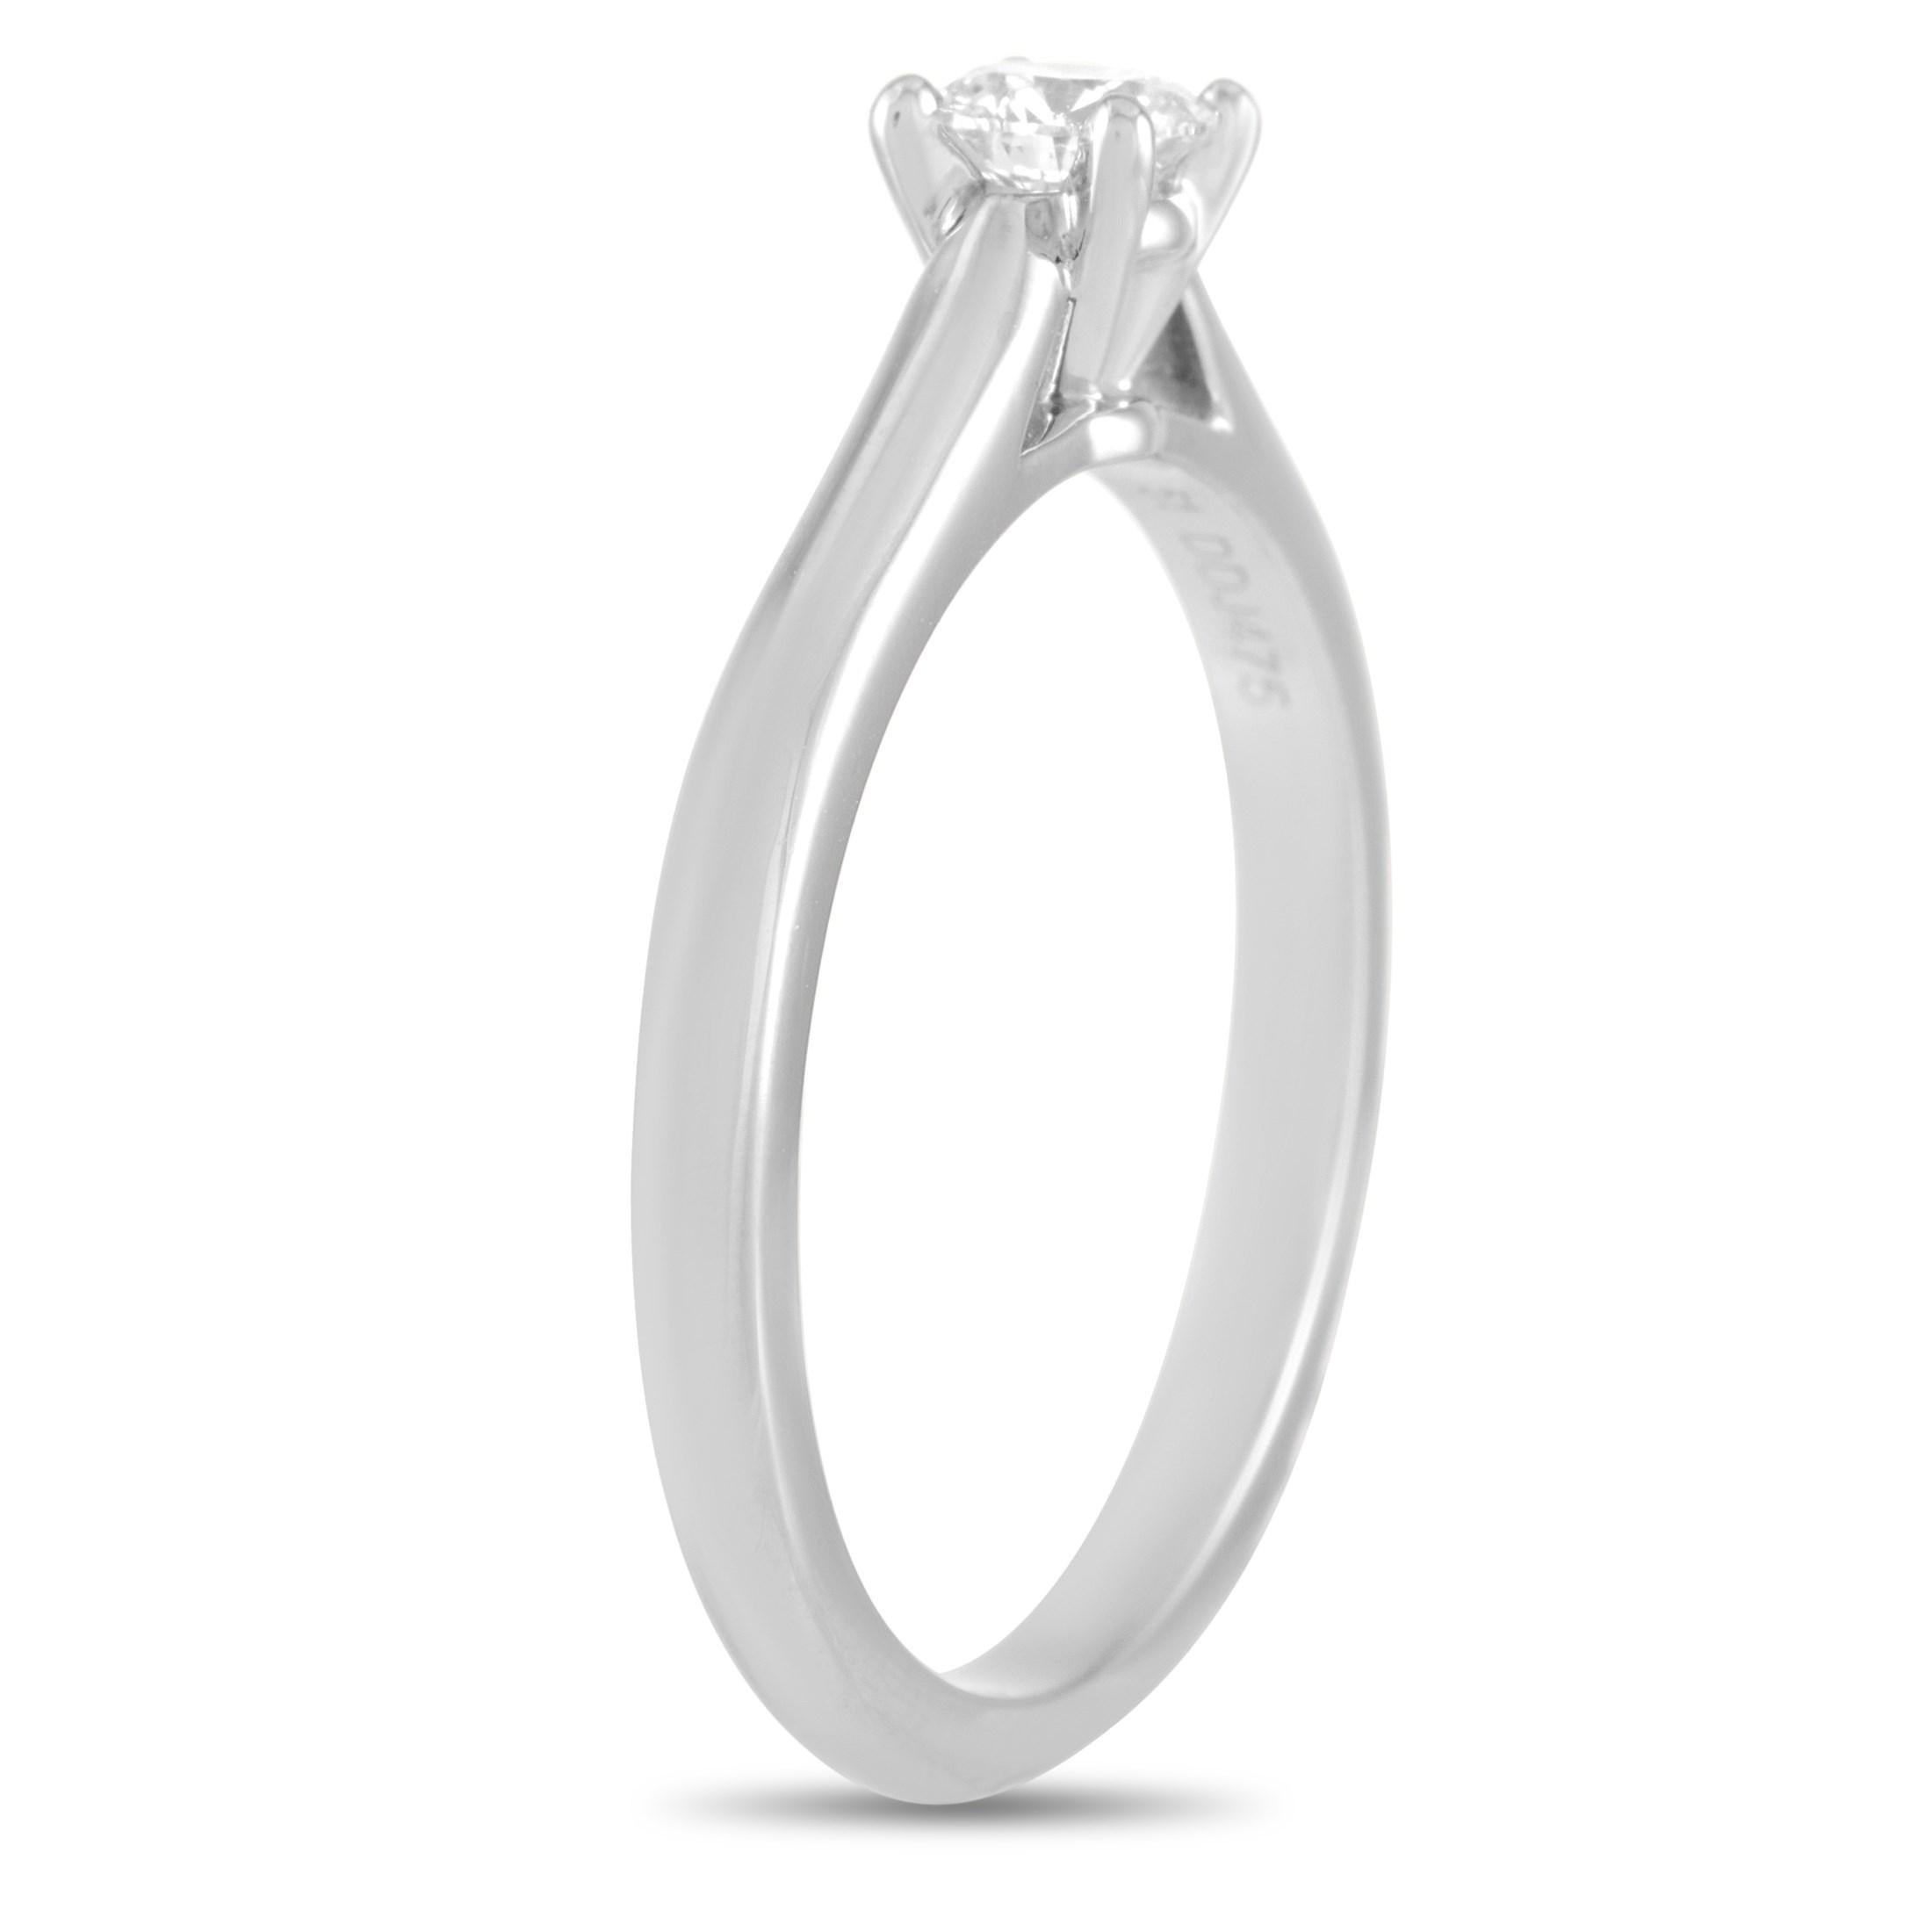 Subtle and gorgeous, the Cartier Platinum 0.23 ct Diamond Engagement Ring features a delicate band and a 0.23 carat round brilliant diamond with VVS1 clarity and F color grade. This classy and dainty engagement ring promises a silhouette that's easy